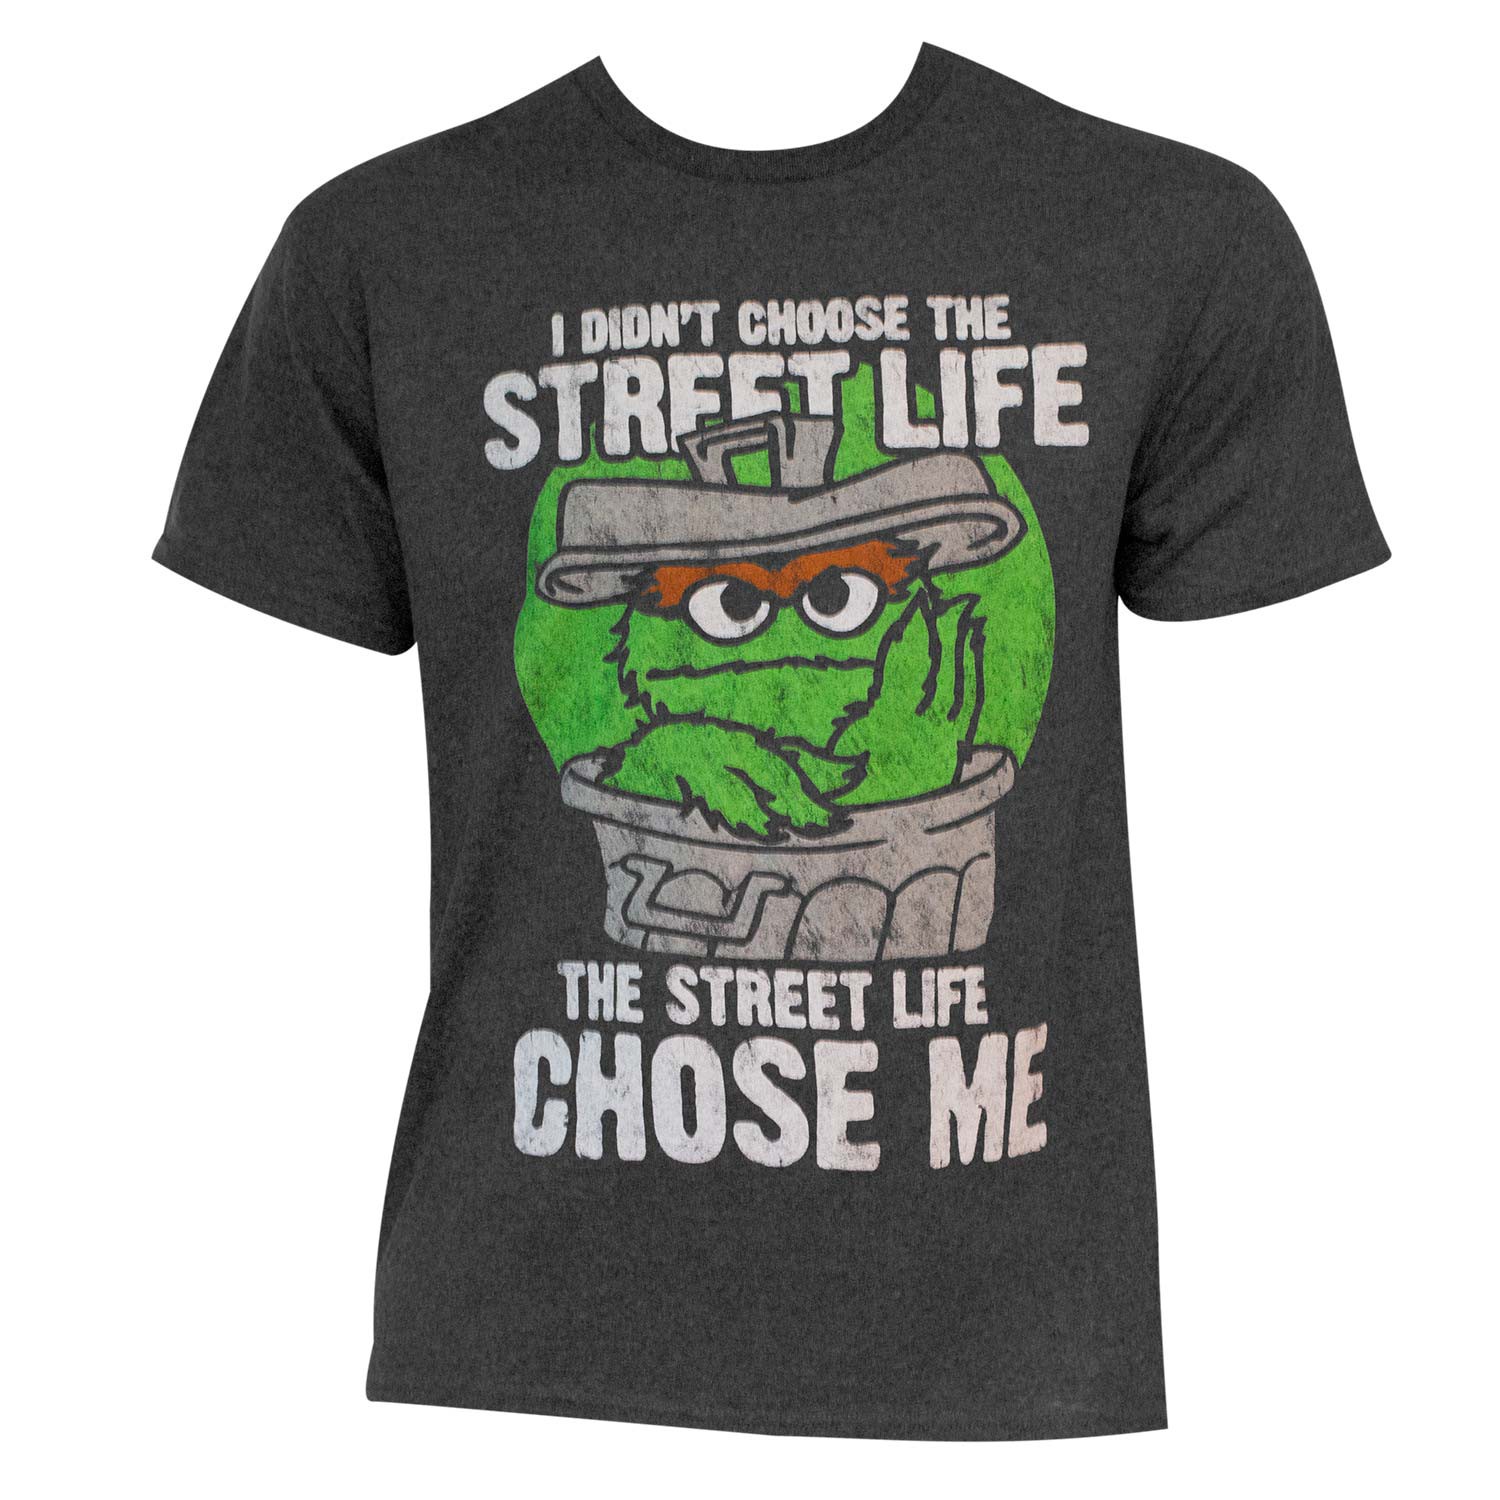 You can choose life. Street Life футболки. Silver Street Life Style футболка. A Life on the Streets текст.